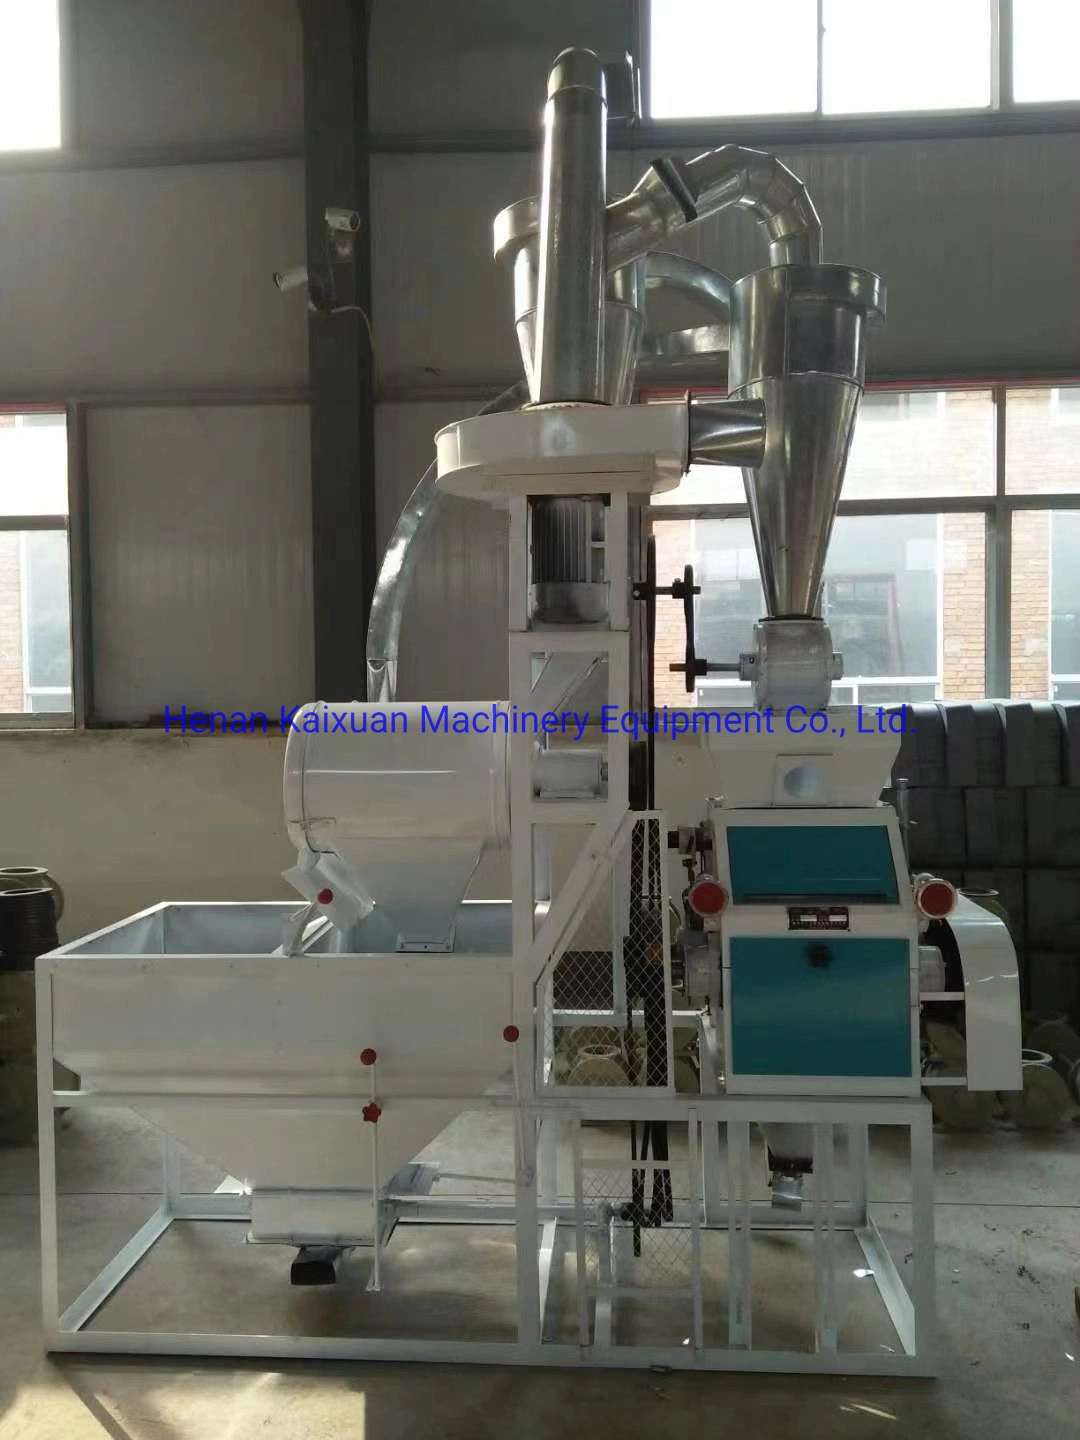 Daily Production of 10 Tons of Flour Captain with Milling Unit Machine